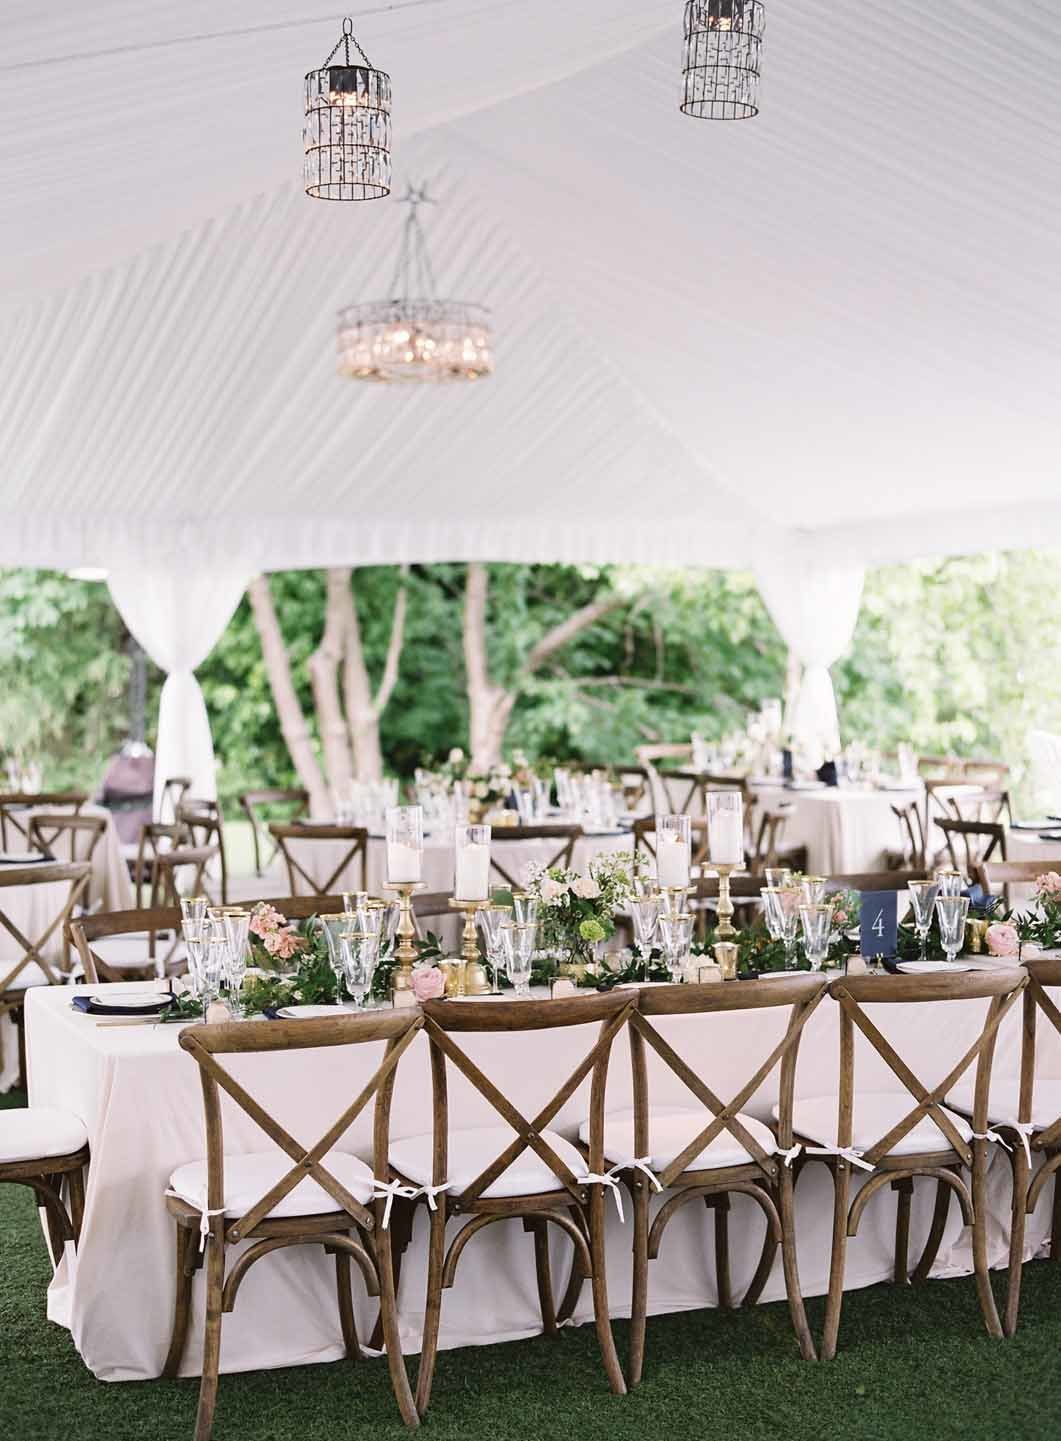 wedding reception in tent with crystal chandeliers, Vineyard chairs, long tables and floral centerpieces